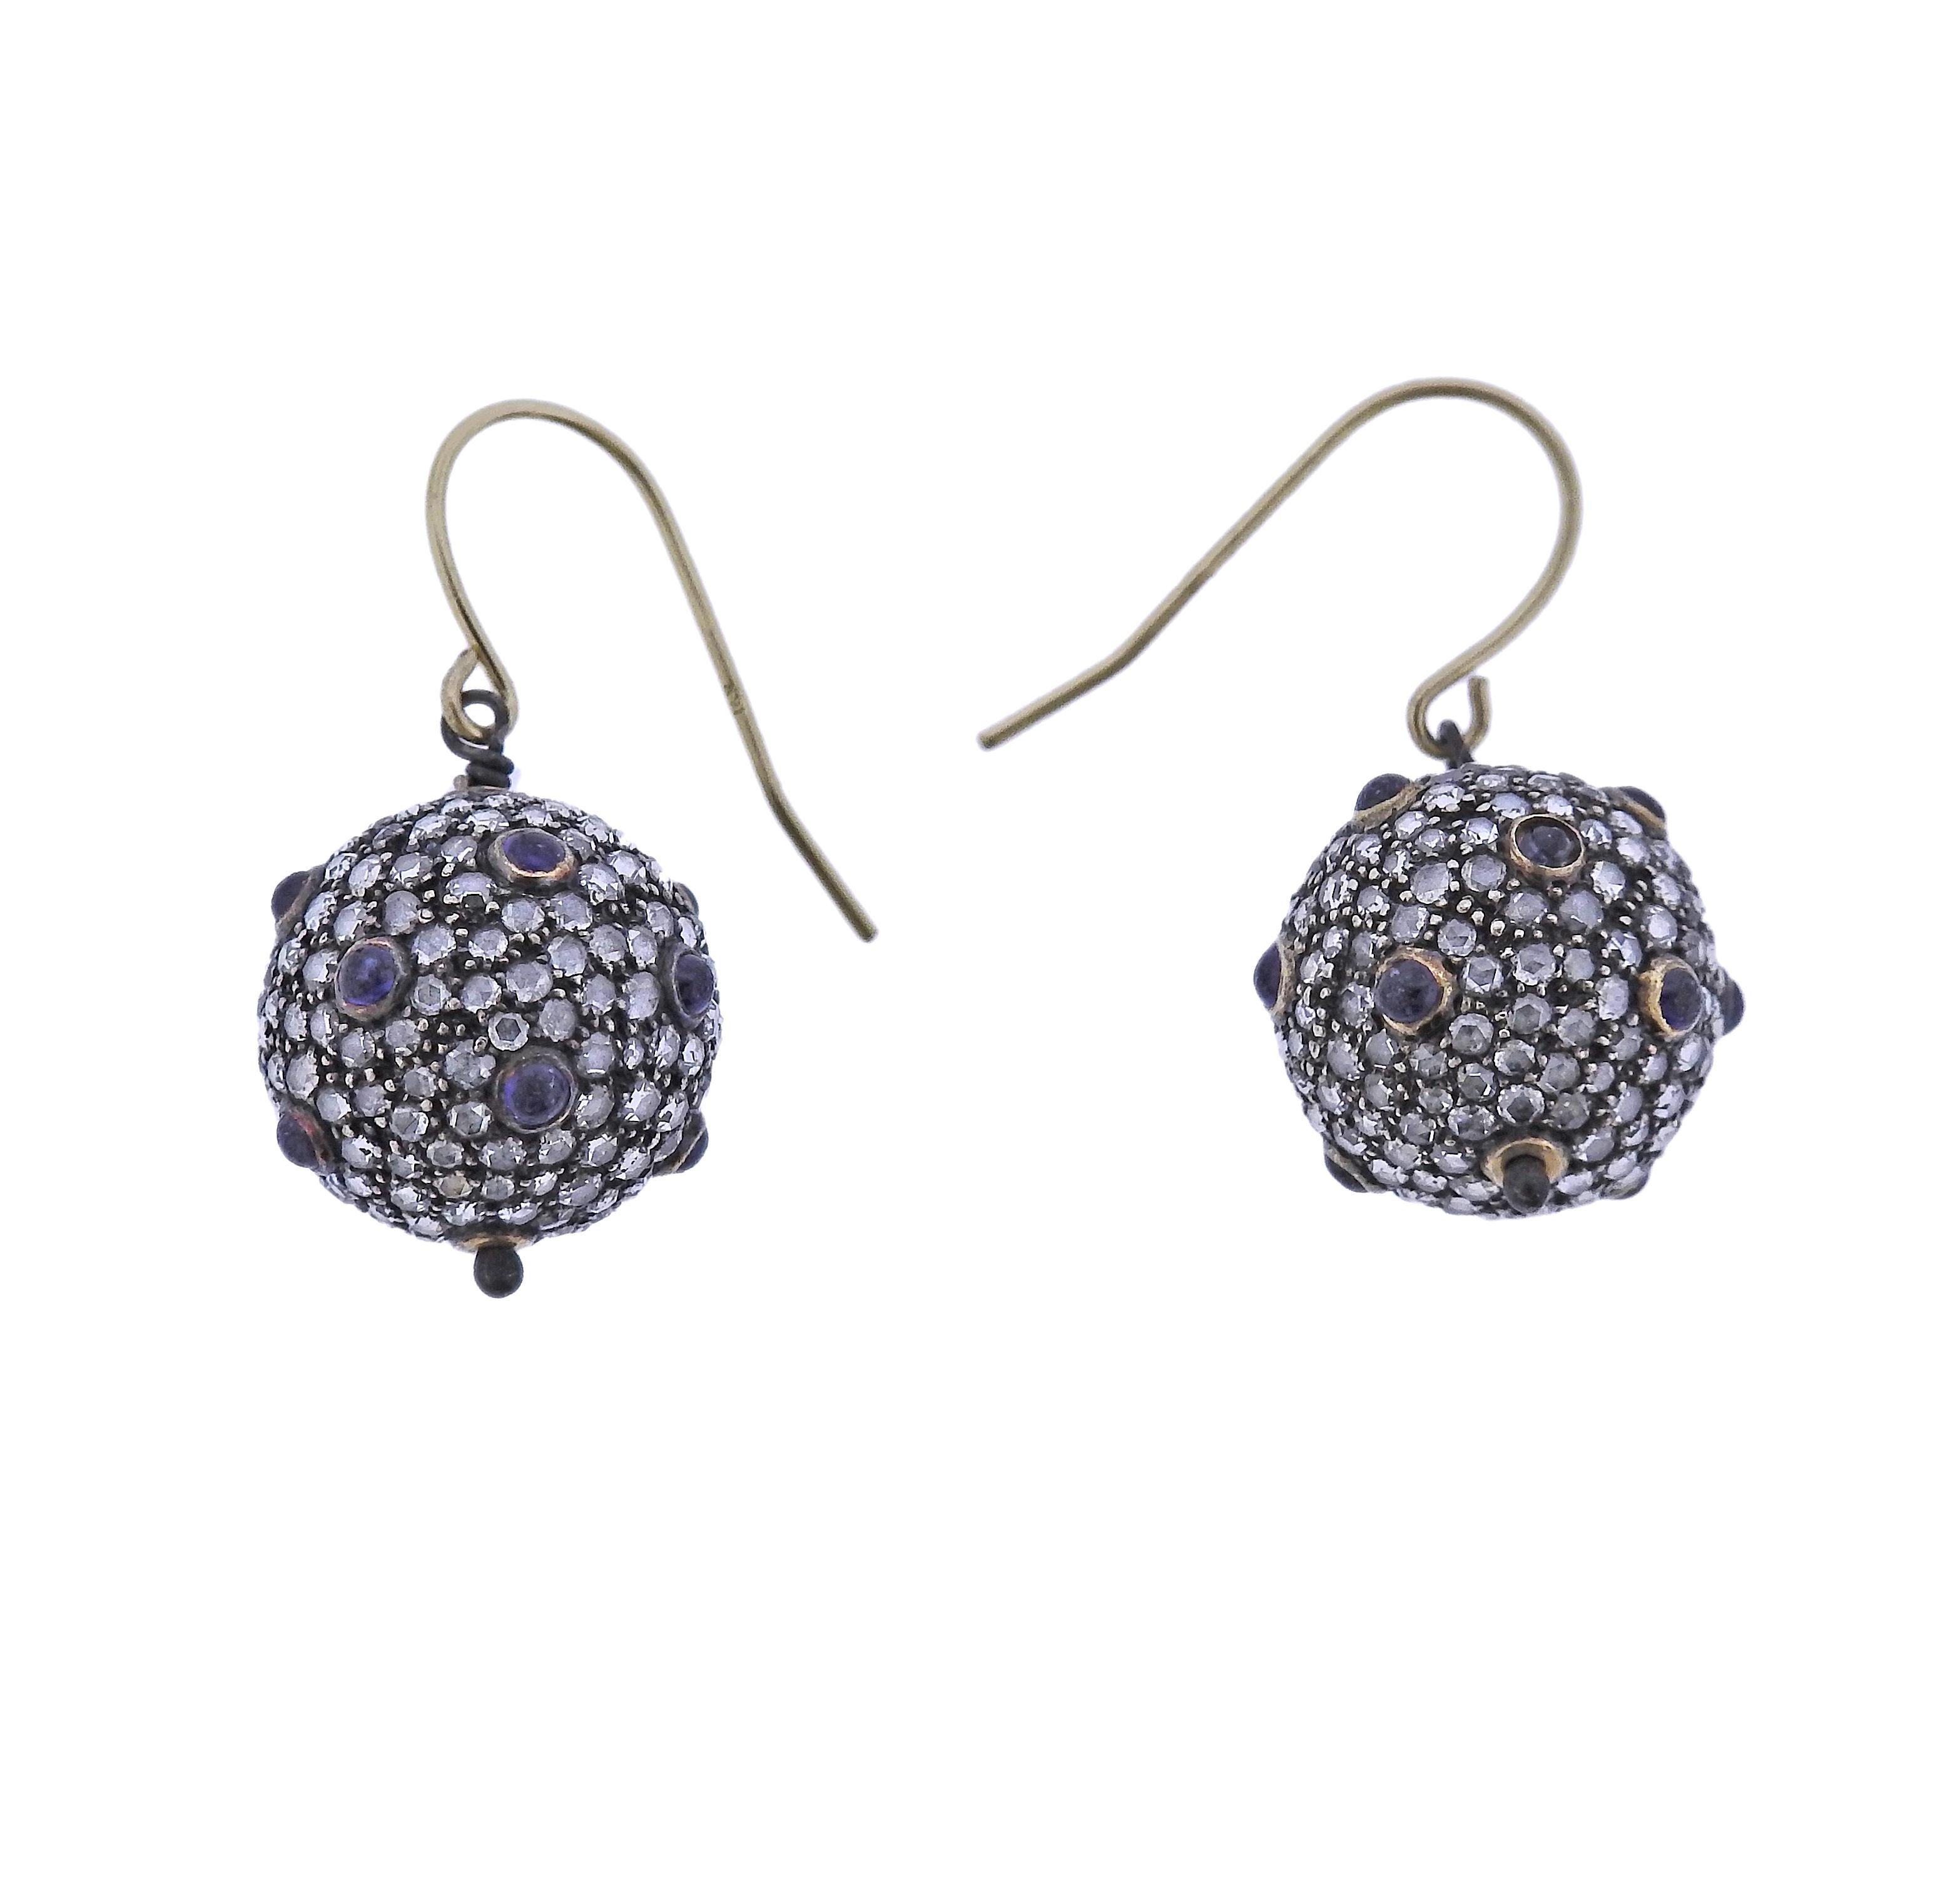 Pair of 14k gold and silver ball drop earrings, set with blue sapphire cabochons and rose cut diamonds - approx. 1.00ctw. Earrings are 29mm long with wires, balls are 15mm in diameter. Weight - 9 grams.